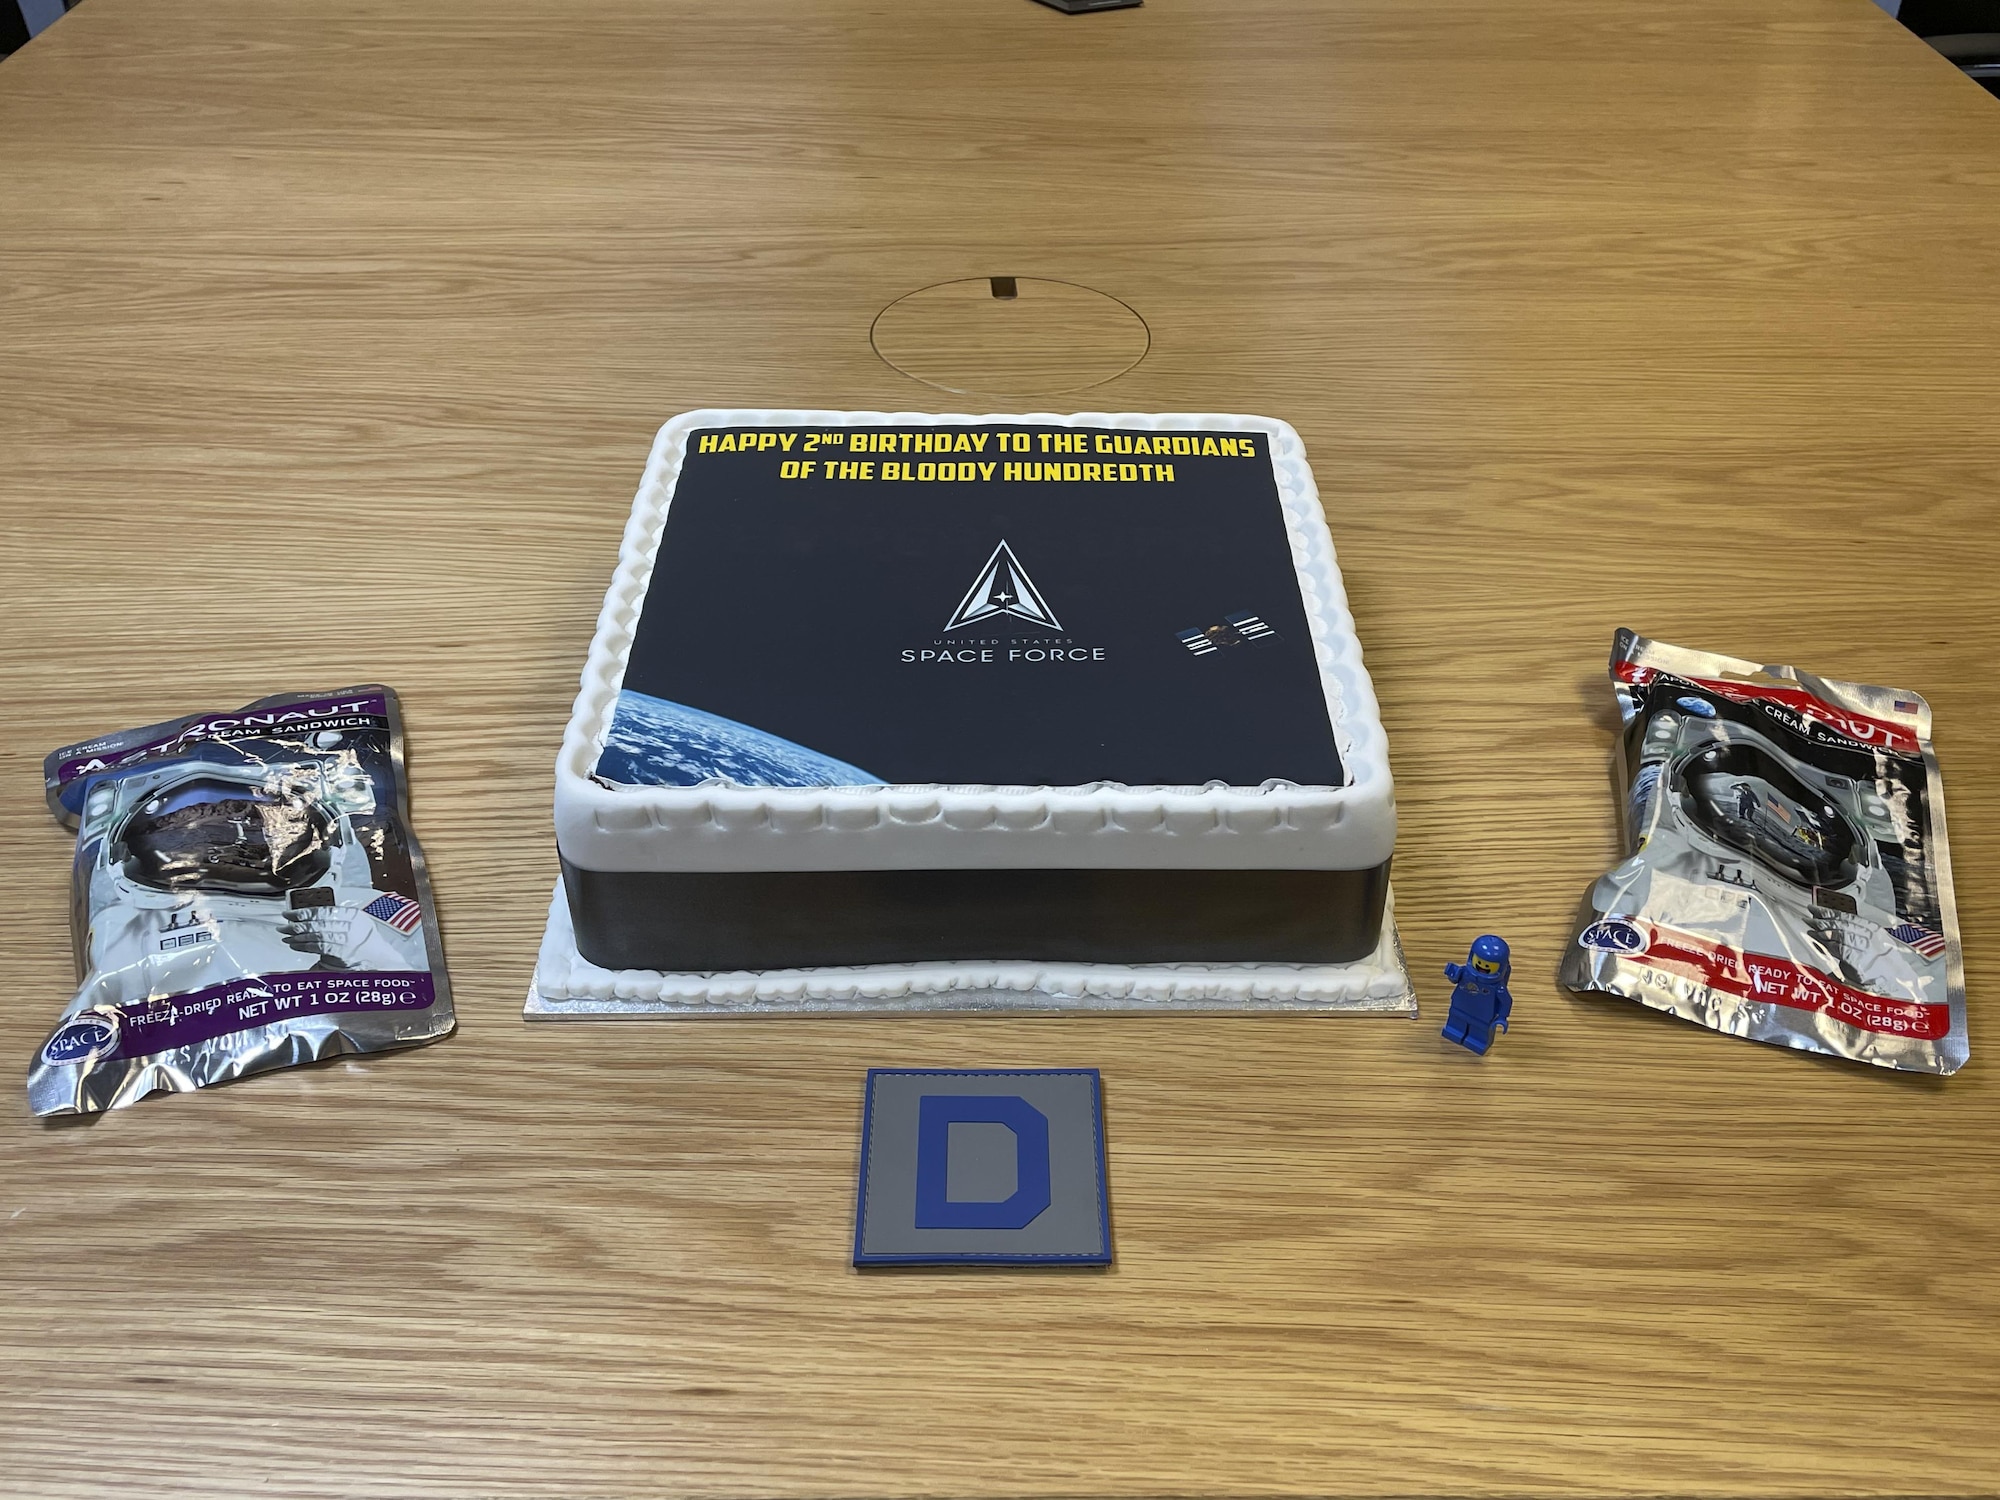 Members of the 100th Air Refueling Wing celebrated the U.S. Space Force’s second birthday with cake and astronaut ice cream sandwiches at Royal Air Force Mildenhall, England, Dec. 20, 2021. The Space Force is part of the Department of the Air Force and is the youngest branch of the U.S. military. (U.S. Air Force photo by Senior Airman Joseph Barron)